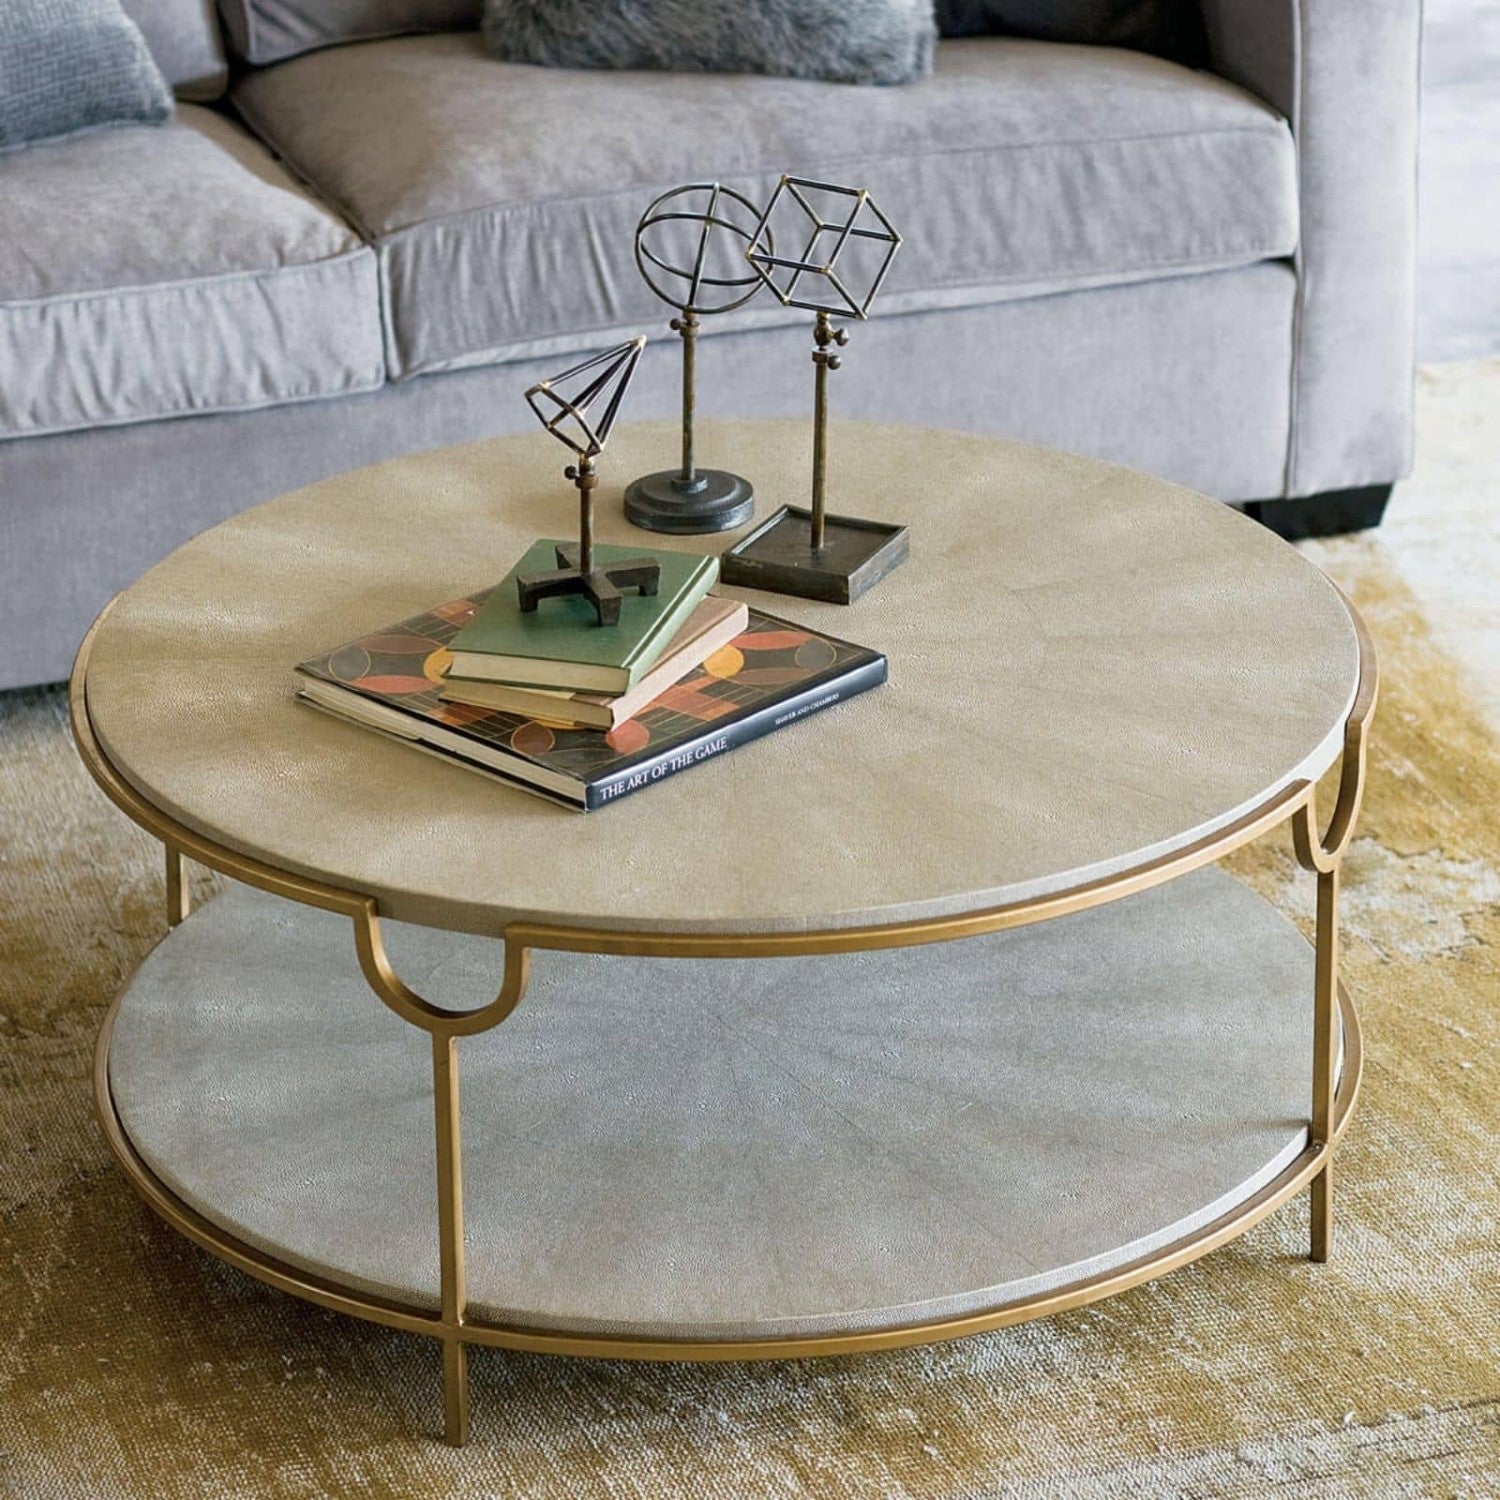 Vogue Shagreen Cocktail Table In Various Colors Burke Decor